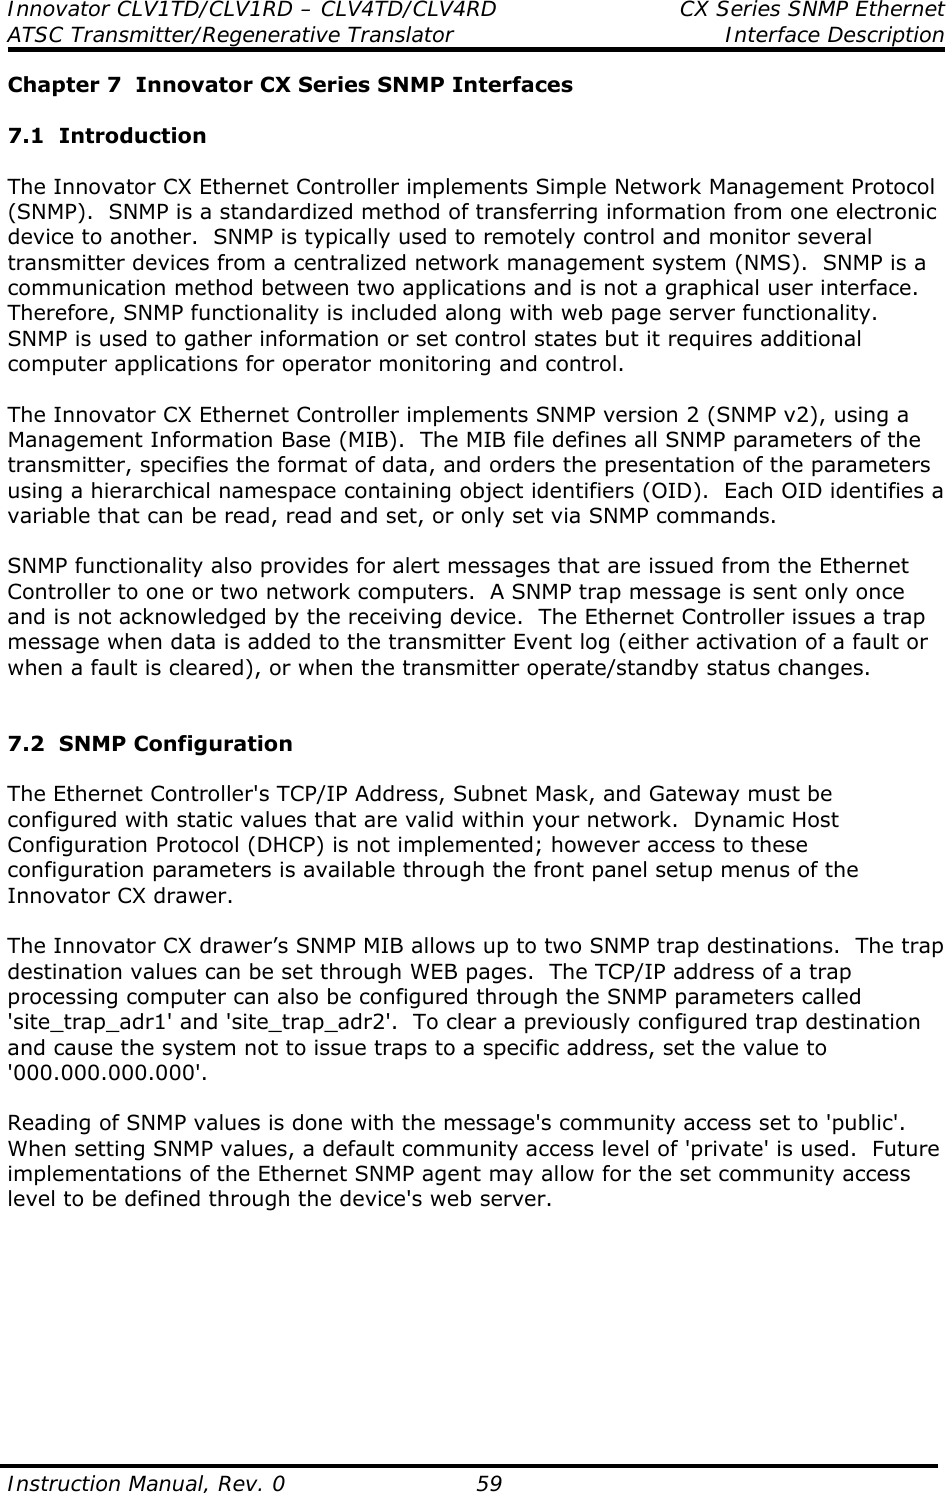 Innovator CLV1TD/CLV1RD – CLV4TD/CLV4RD  CX Series SNMP Ethernet ATSC Transmitter/Regenerative Translator Interface Description  Instruction Manual, Rev. 0    59 Chapter 7  Innovator CX Series SNMP Interfaces  7.1  Introduction  The Innovator CX Ethernet Controller implements Simple Network Management Protocol (SNMP).  SNMP is a standardized method of transferring information from one electronic device to another.  SNMP is typically used to remotely control and monitor several transmitter devices from a centralized network management system (NMS).  SNMP is a communication method between two applications and is not a graphical user interface.  Therefore, SNMP functionality is included along with web page server functionality.  SNMP is used to gather information or set control states but it requires additional computer applications for operator monitoring and control.    The Innovator CX Ethernet Controller implements SNMP version 2 (SNMP v2), using a Management Information Base (MIB).  The MIB file defines all SNMP parameters of the transmitter, specifies the format of data, and orders the presentation of the parameters using a hierarchical namespace containing object identifiers (OID).  Each OID identifies a variable that can be read, read and set, or only set via SNMP commands.    SNMP functionality also provides for alert messages that are issued from the Ethernet Controller to one or two network computers.  A SNMP trap message is sent only once and is not acknowledged by the receiving device.  The Ethernet Controller issues a trap message when data is added to the transmitter Event log (either activation of a fault or when a fault is cleared), or when the transmitter operate/standby status changes.   7.2  SNMP Configuration  The Ethernet Controller&apos;s TCP/IP Address, Subnet Mask, and Gateway must be configured with static values that are valid within your network.  Dynamic Host Configuration Protocol (DHCP) is not implemented; however access to these configuration parameters is available through the front panel setup menus of the Innovator CX drawer.  The Innovator CX drawer’s SNMP MIB allows up to two SNMP trap destinations.  The trap destination values can be set through WEB pages.  The TCP/IP address of a trap processing computer can also be configured through the SNMP parameters called &apos;site_trap_adr1&apos; and &apos;site_trap_adr2&apos;.  To clear a previously configured trap destination and cause the system not to issue traps to a specific address, set the value to &apos;000.000.000.000&apos;.  Reading of SNMP values is done with the message&apos;s community access set to &apos;public&apos;.  When setting SNMP values, a default community access level of &apos;private&apos; is used.  Future implementations of the Ethernet SNMP agent may allow for the set community access level to be defined through the device&apos;s web server.          